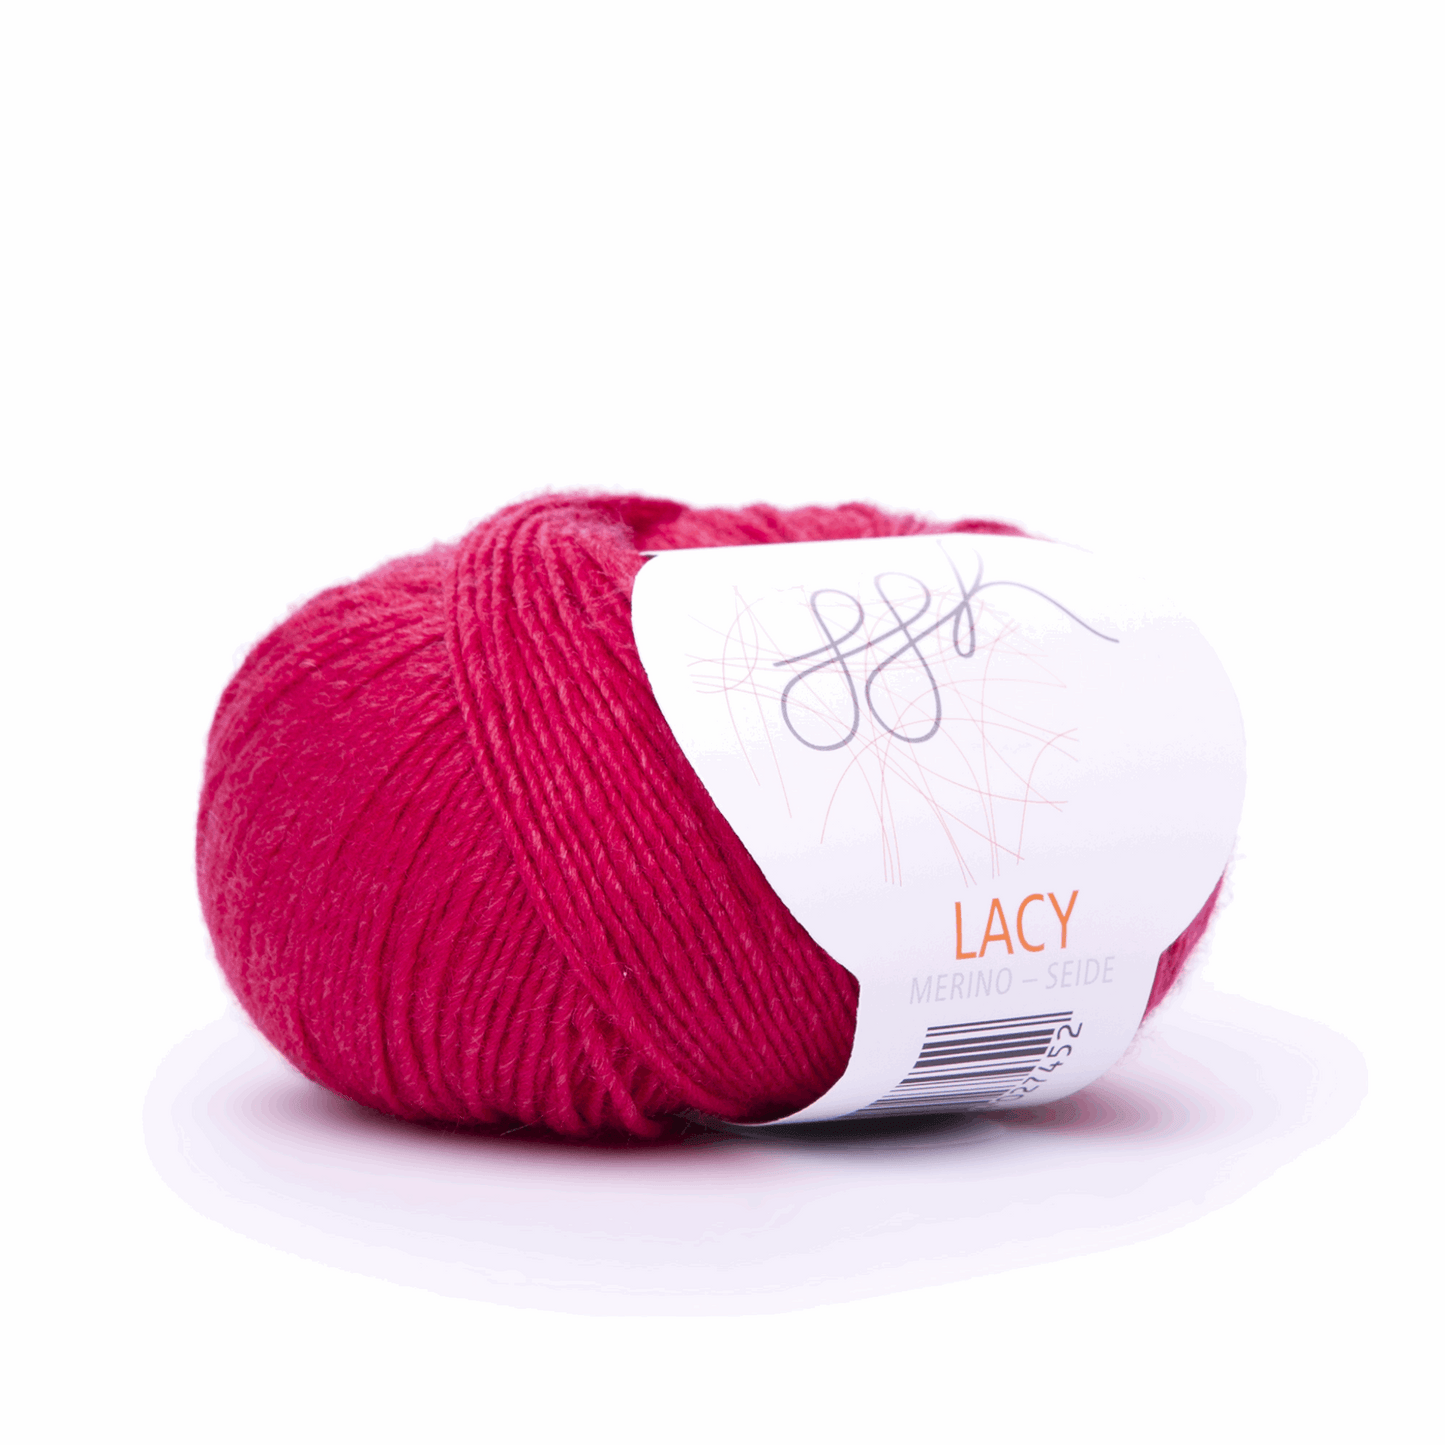 ggh Lacy 25g, korall rot, 96016, Farbe 17